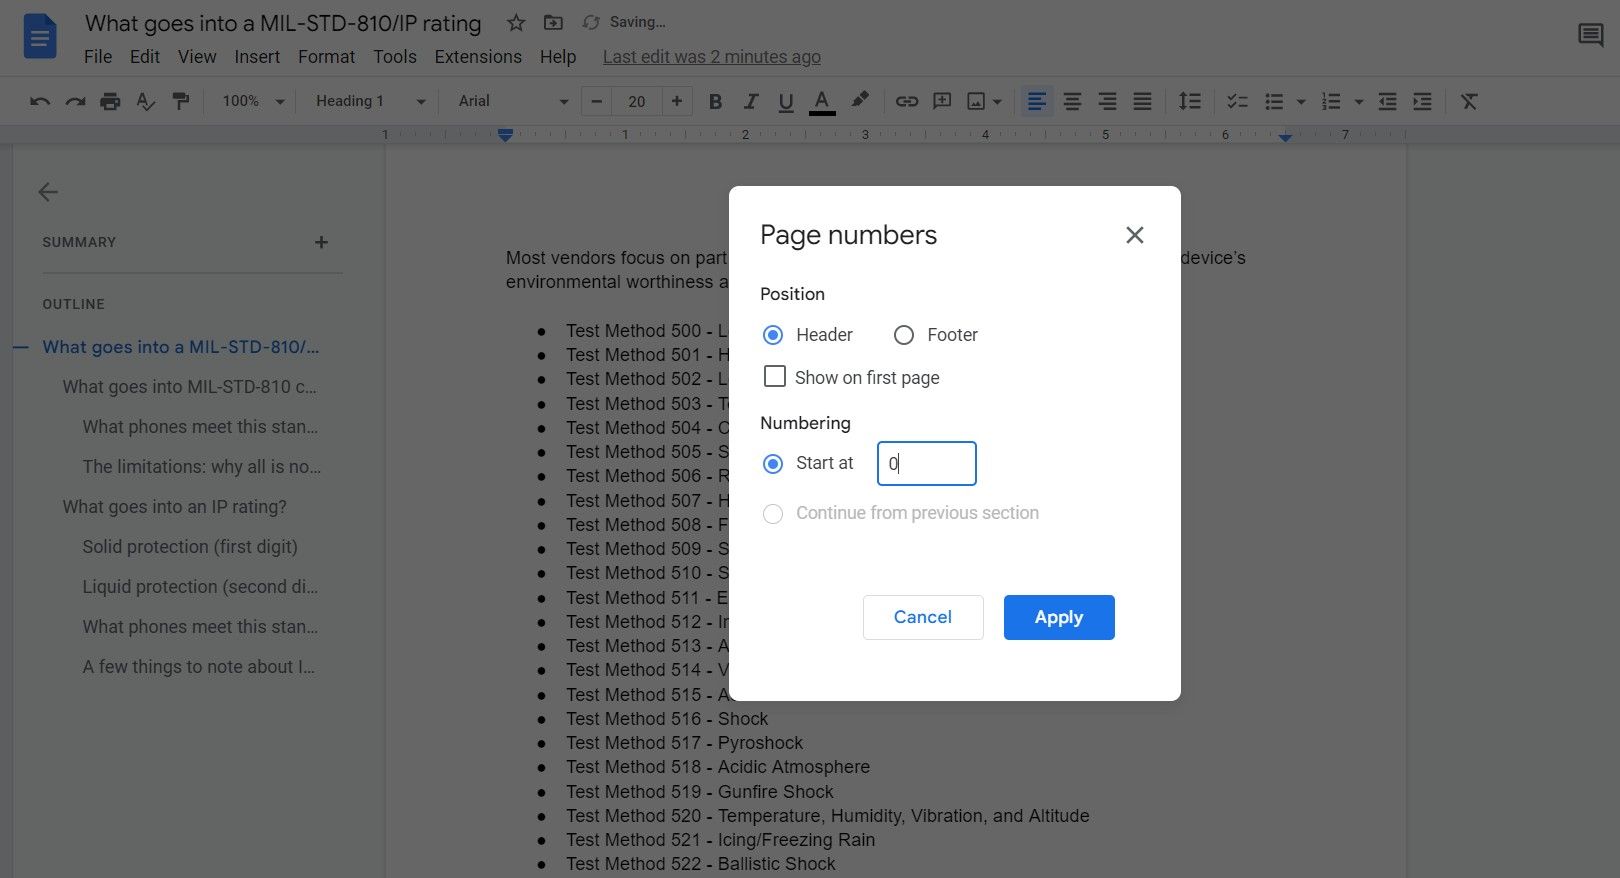 The Google Docs Page numbers dialog box showing how to start page numbering at a custom number